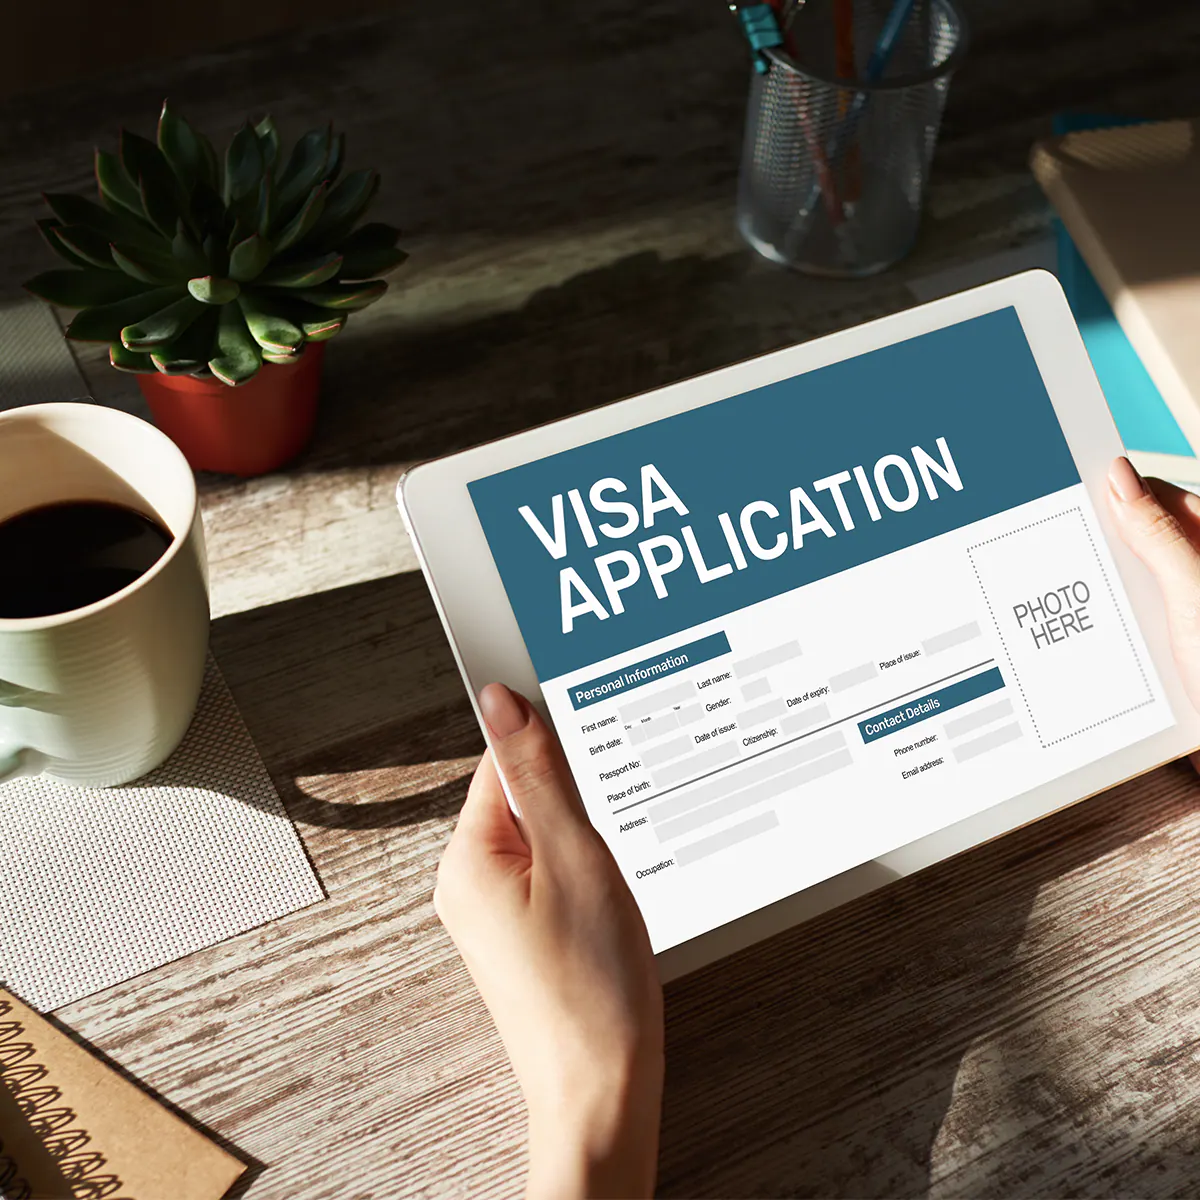 Here is how you can get your student visa australia approved smoothly